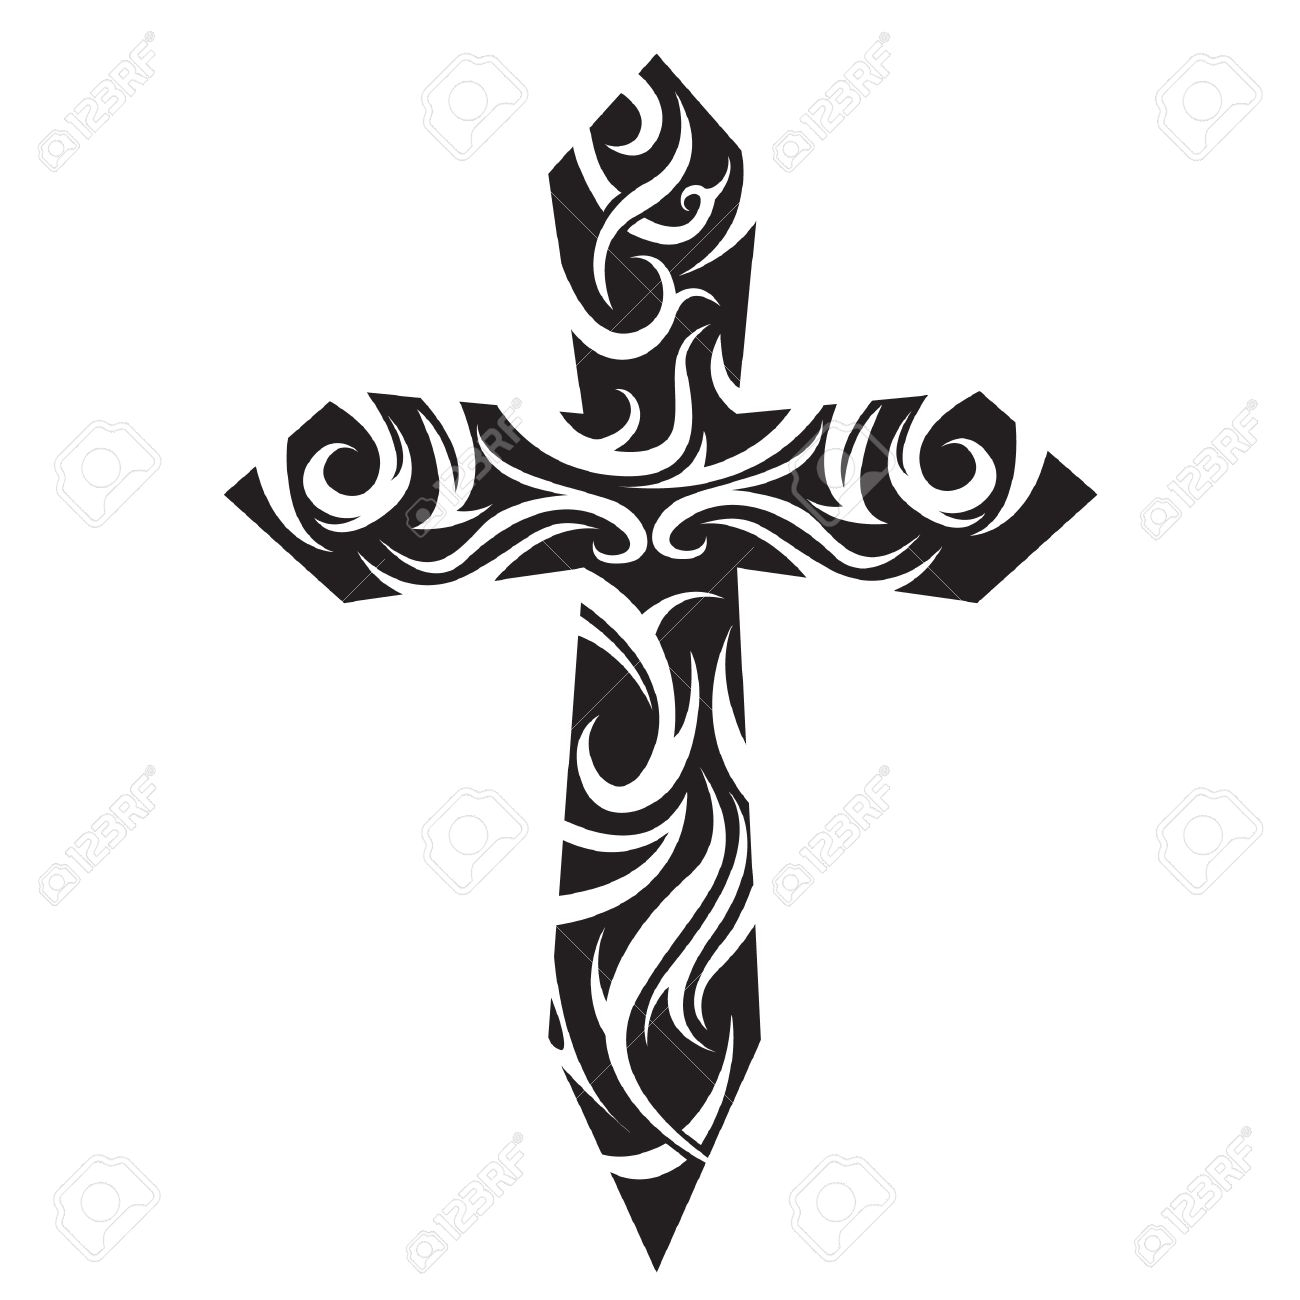 Tribal Cross Tattoo Royalty Free Cliparts Vectors And Stock in size 1300 X 1300